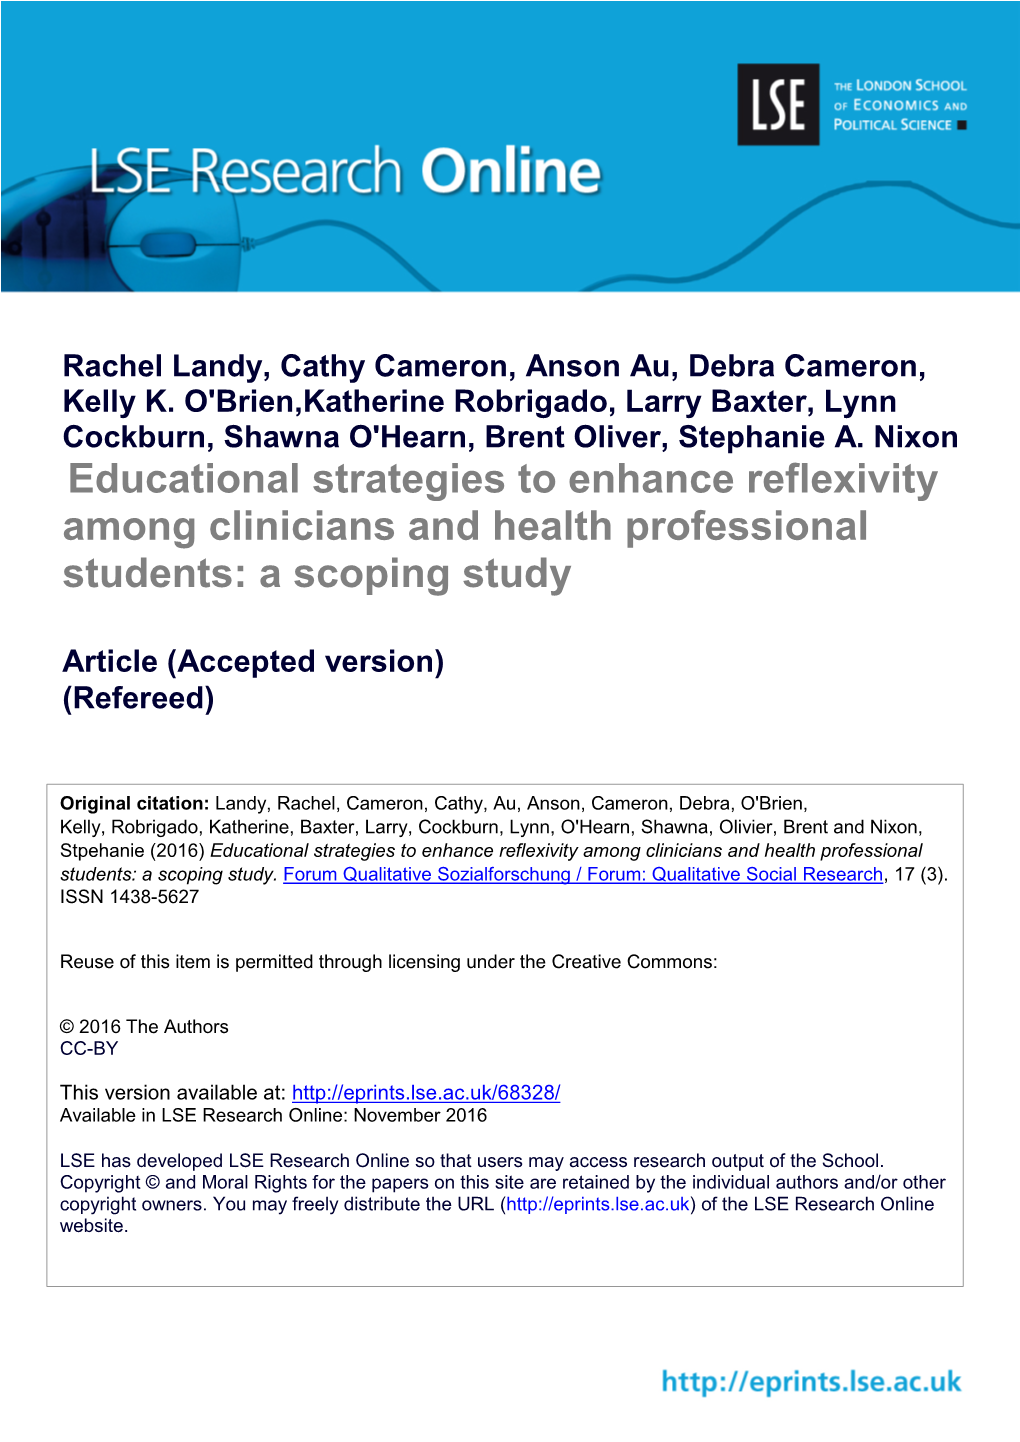 Educational Strategies to Enhance Reflexivity Among Clinicians and Health Professional Students: a Scoping Study